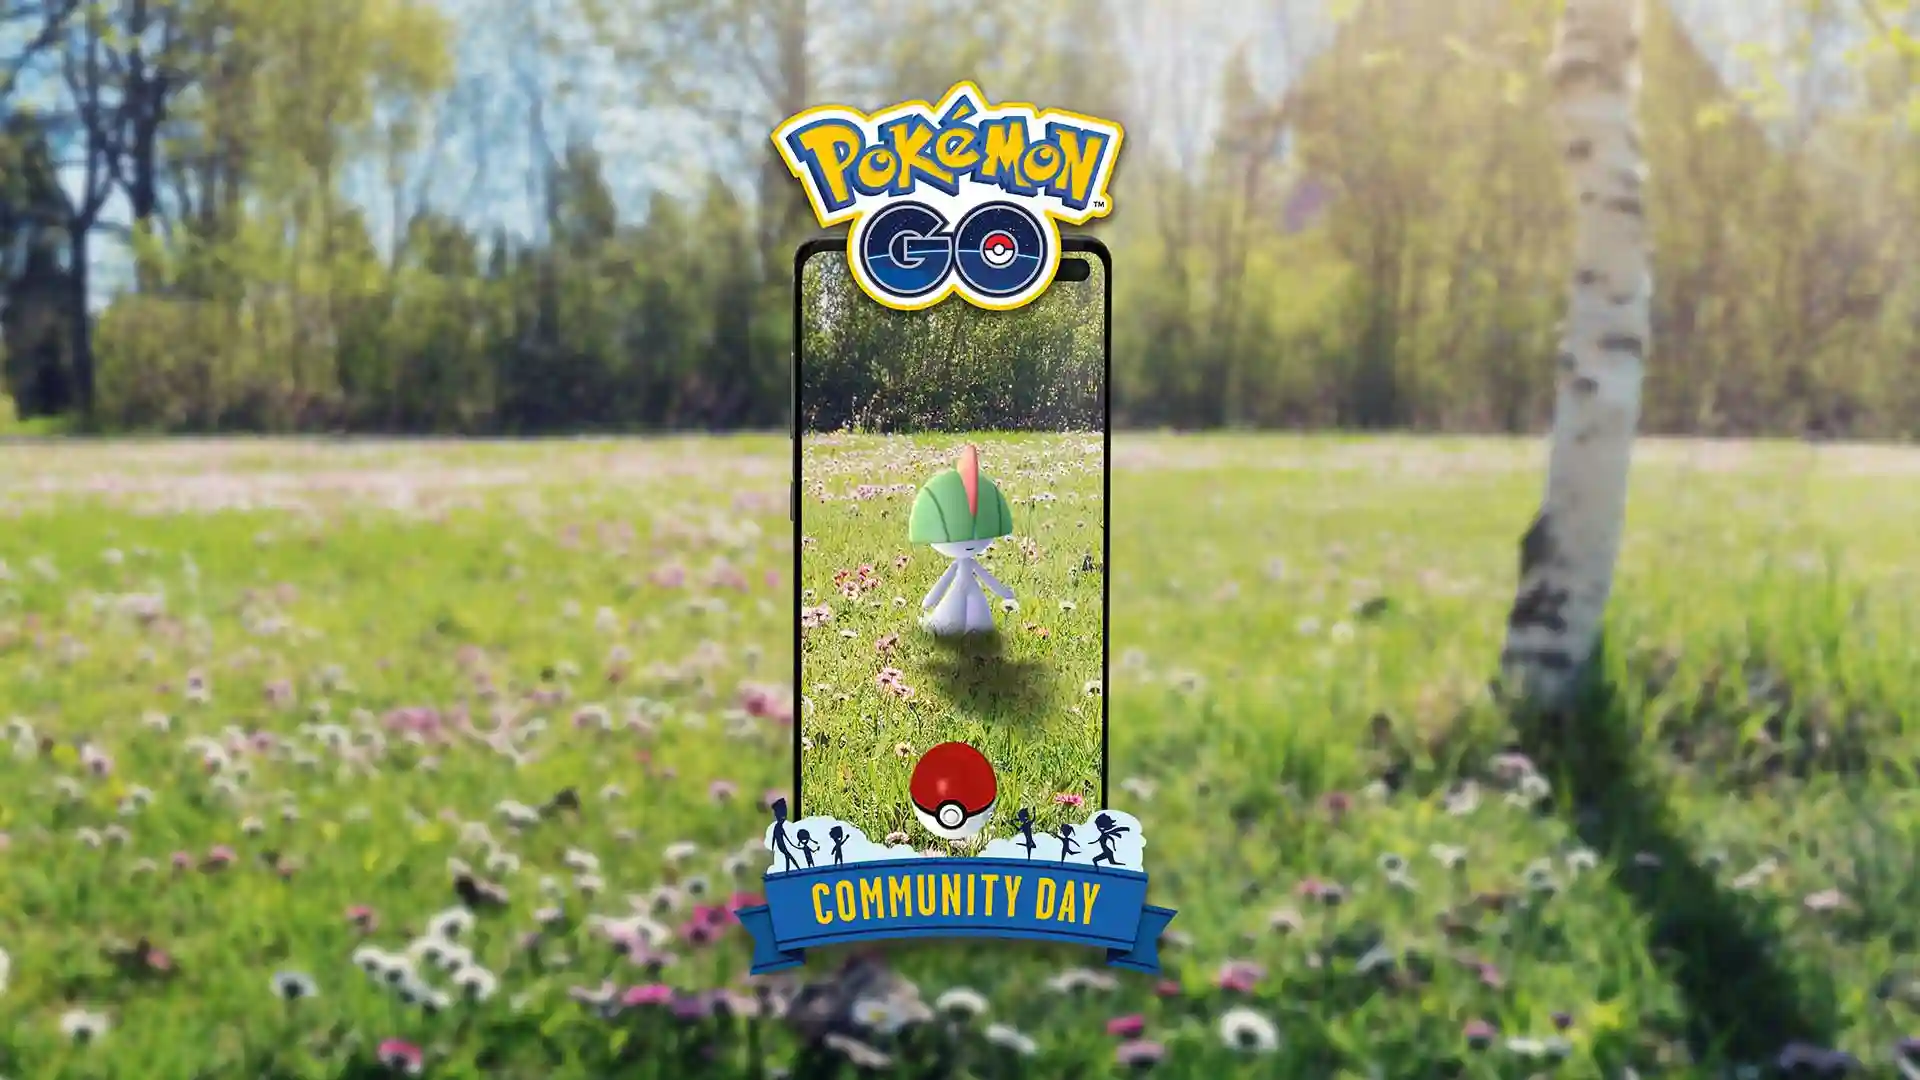 Pokemon Go: Protagonists Are Ready For Next Community Days